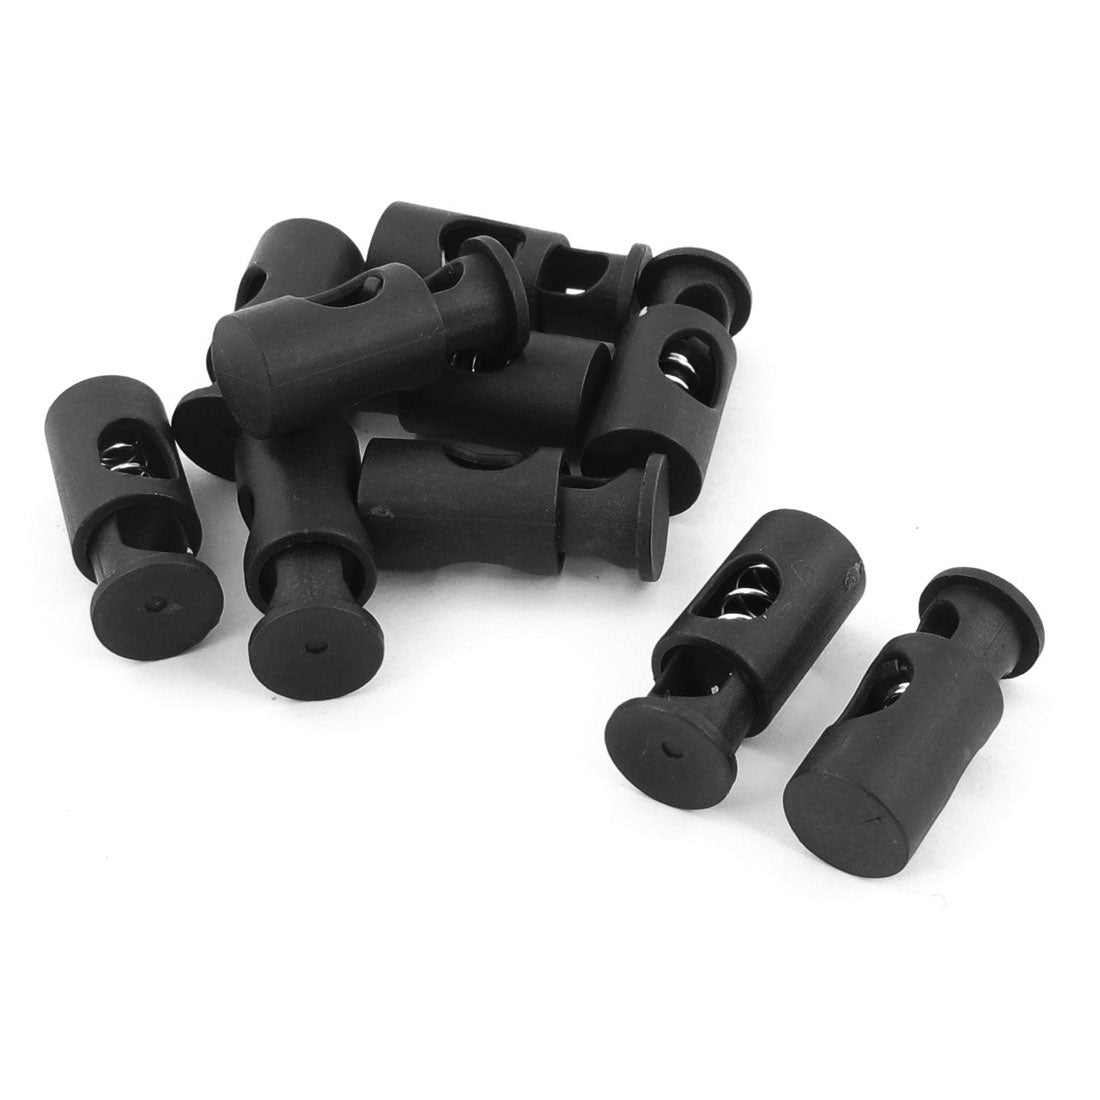 uxcell Uxcell Black Plastic 6mm Dia One Hole Backpack Lanyard Cord Locks Ends 10 Pcs